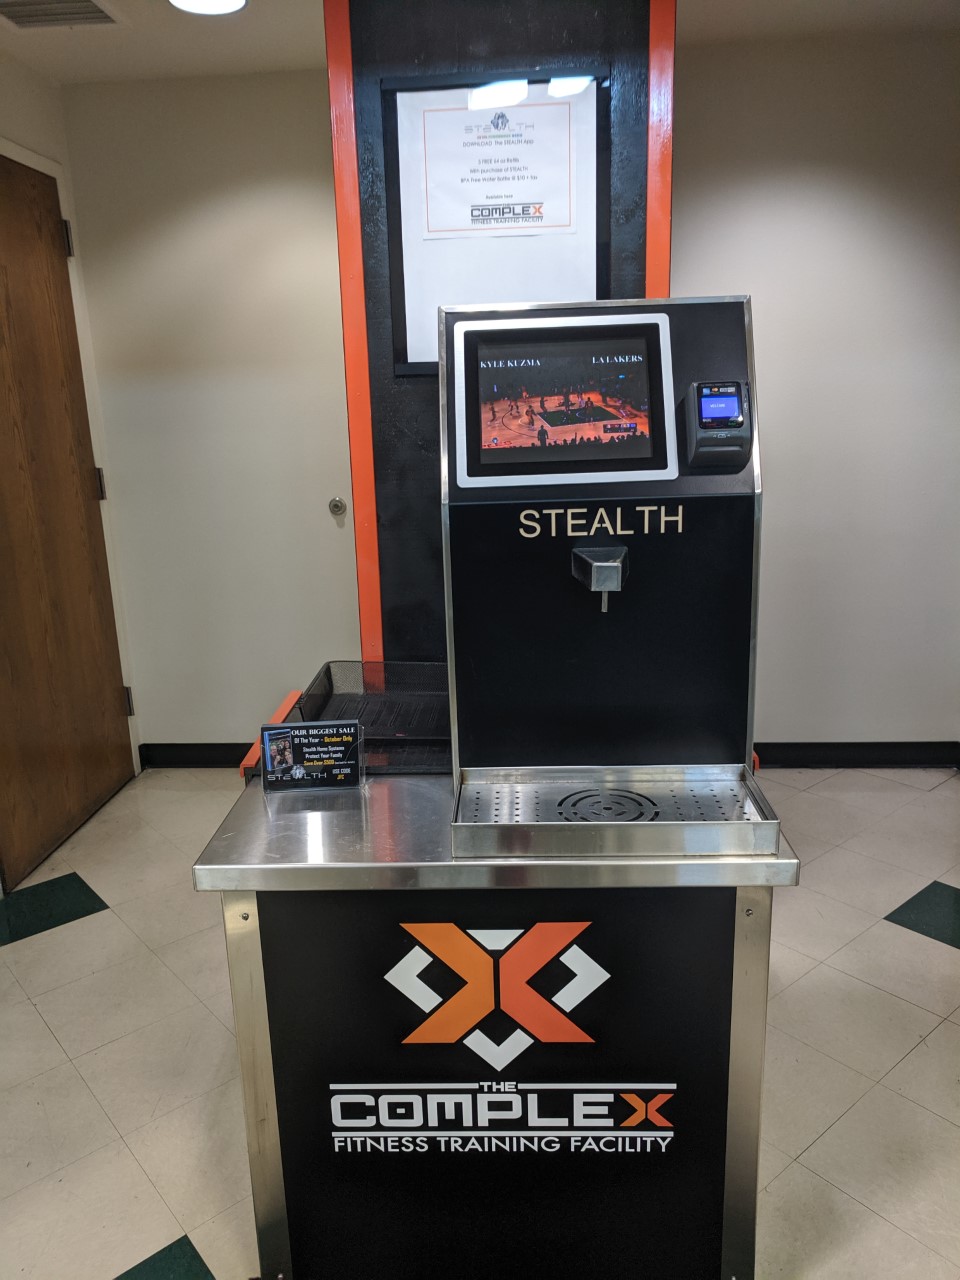 Water dispenser with orange and black colors and the text "Stealth"